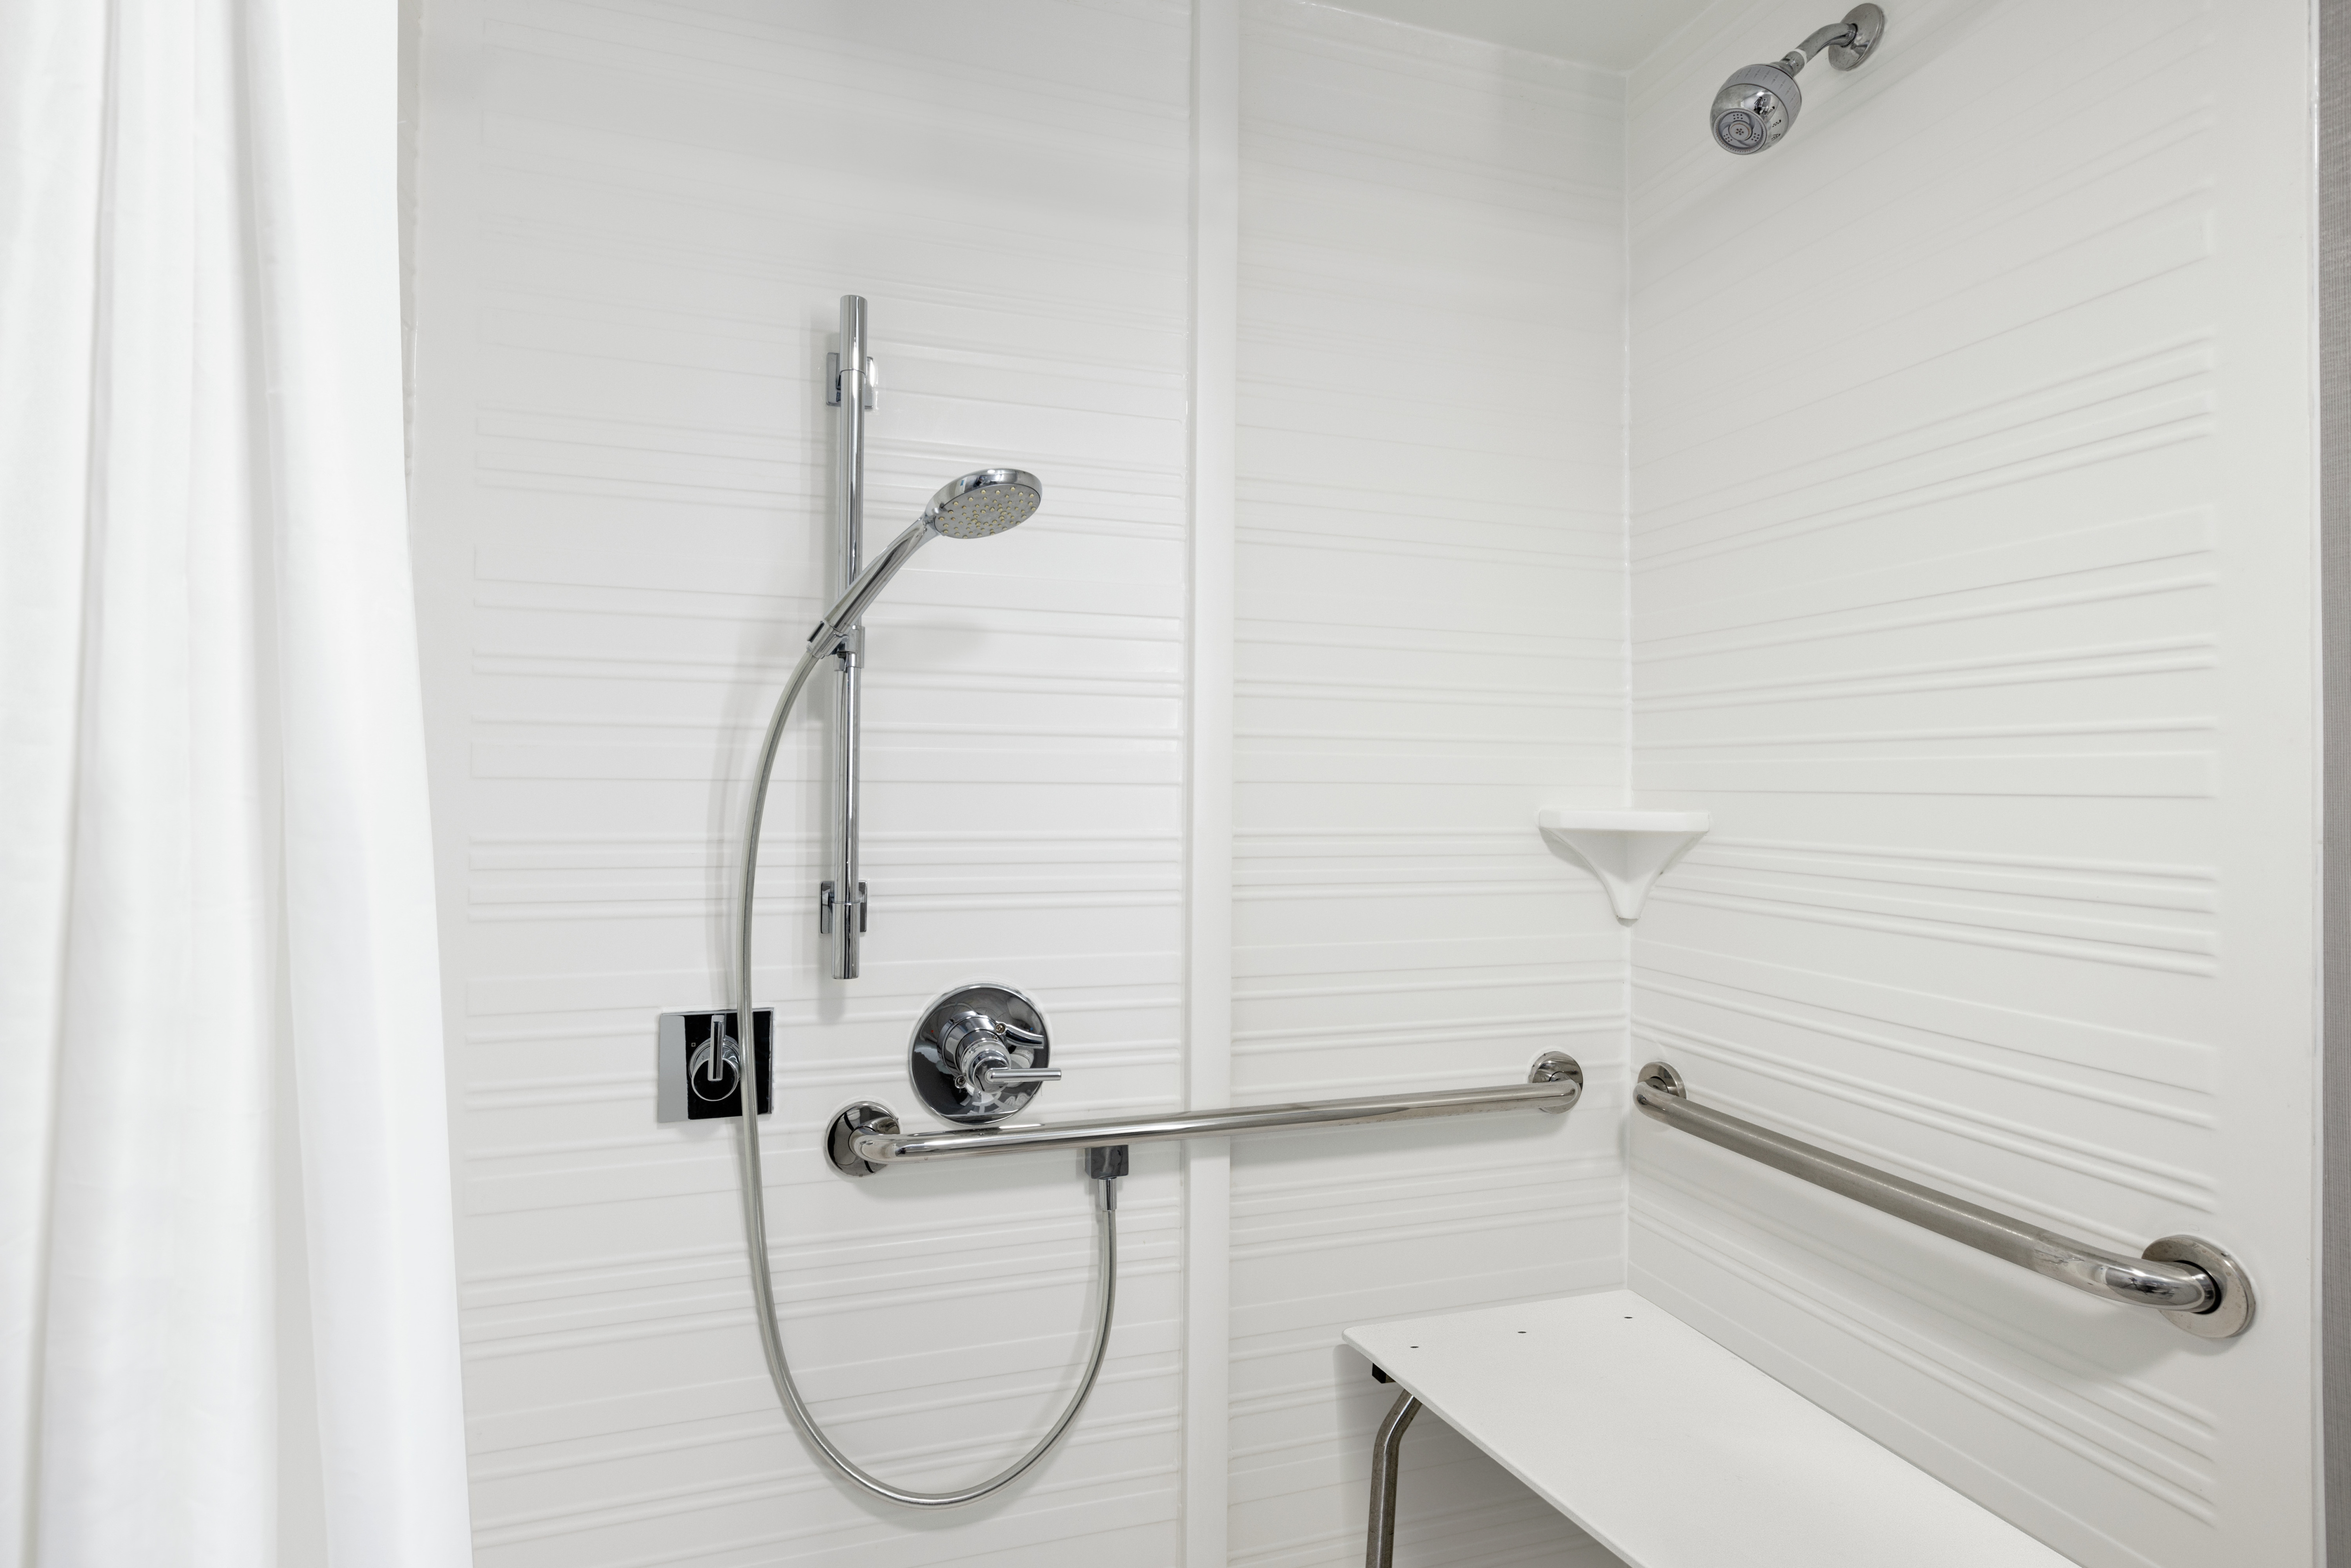 A view of the highly assistive roll-in shower.